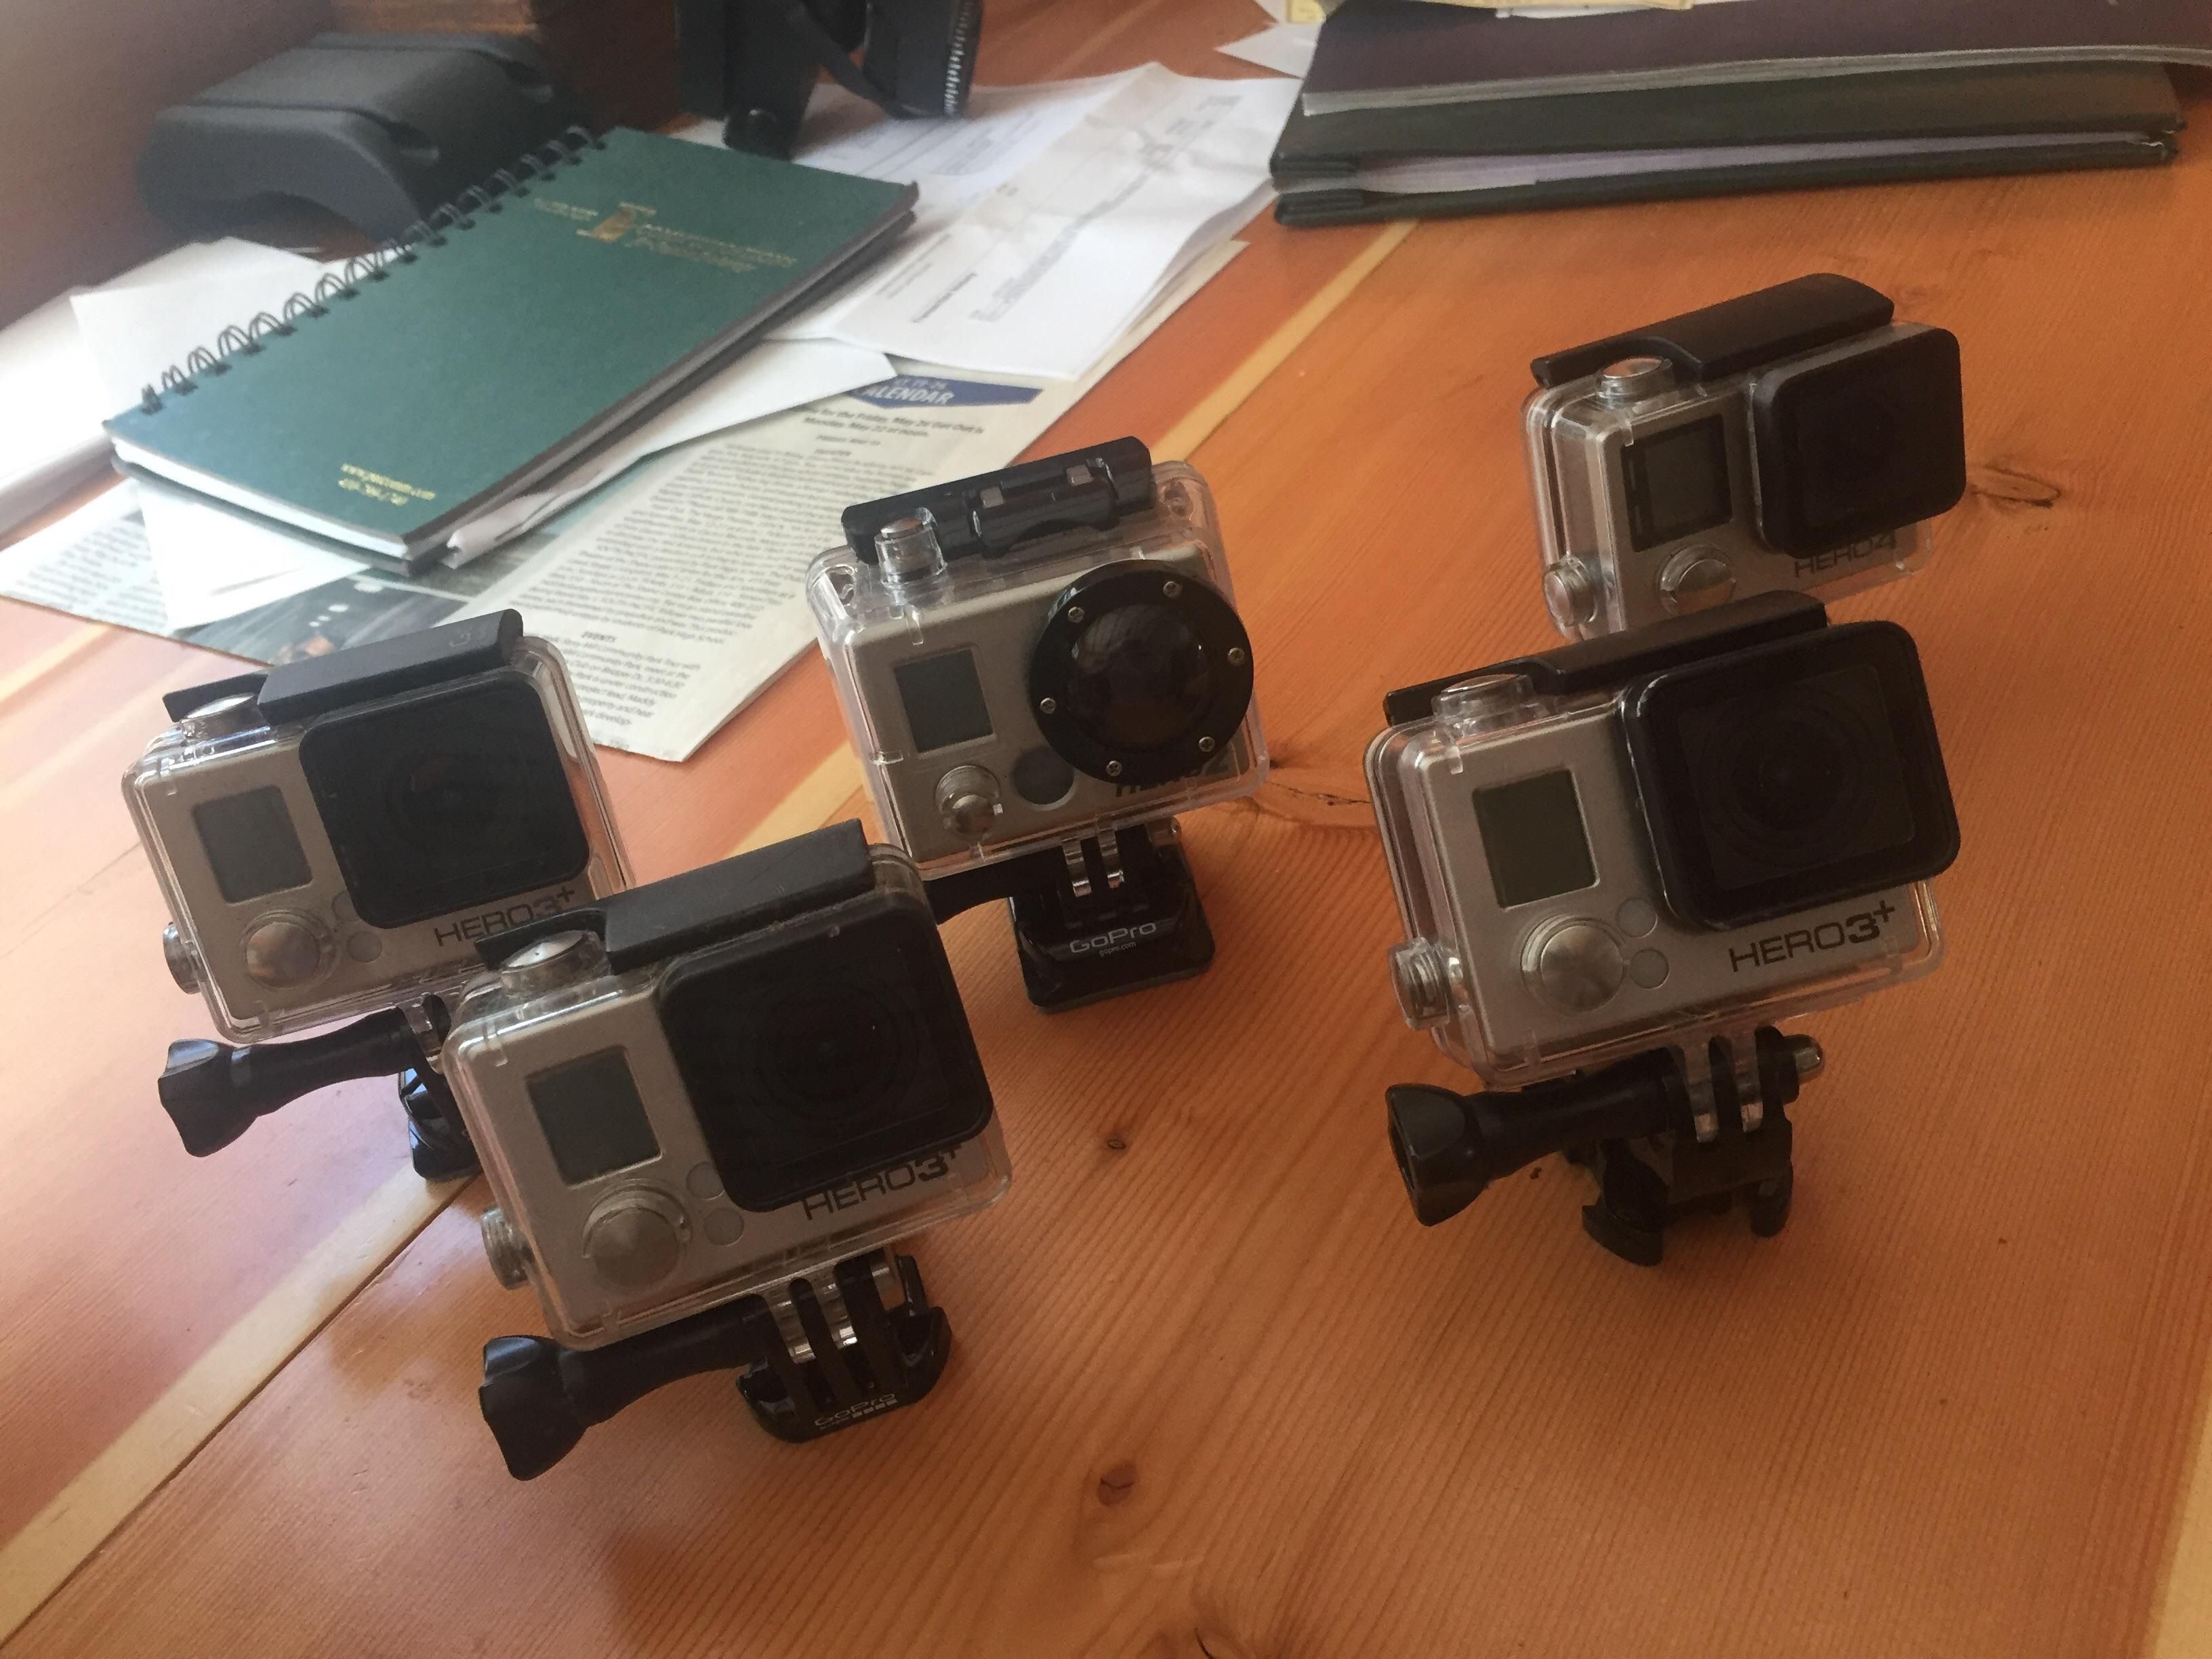 Went up hiking at my local ski resort during the off season and found 5 gopros that people lost in the snow!